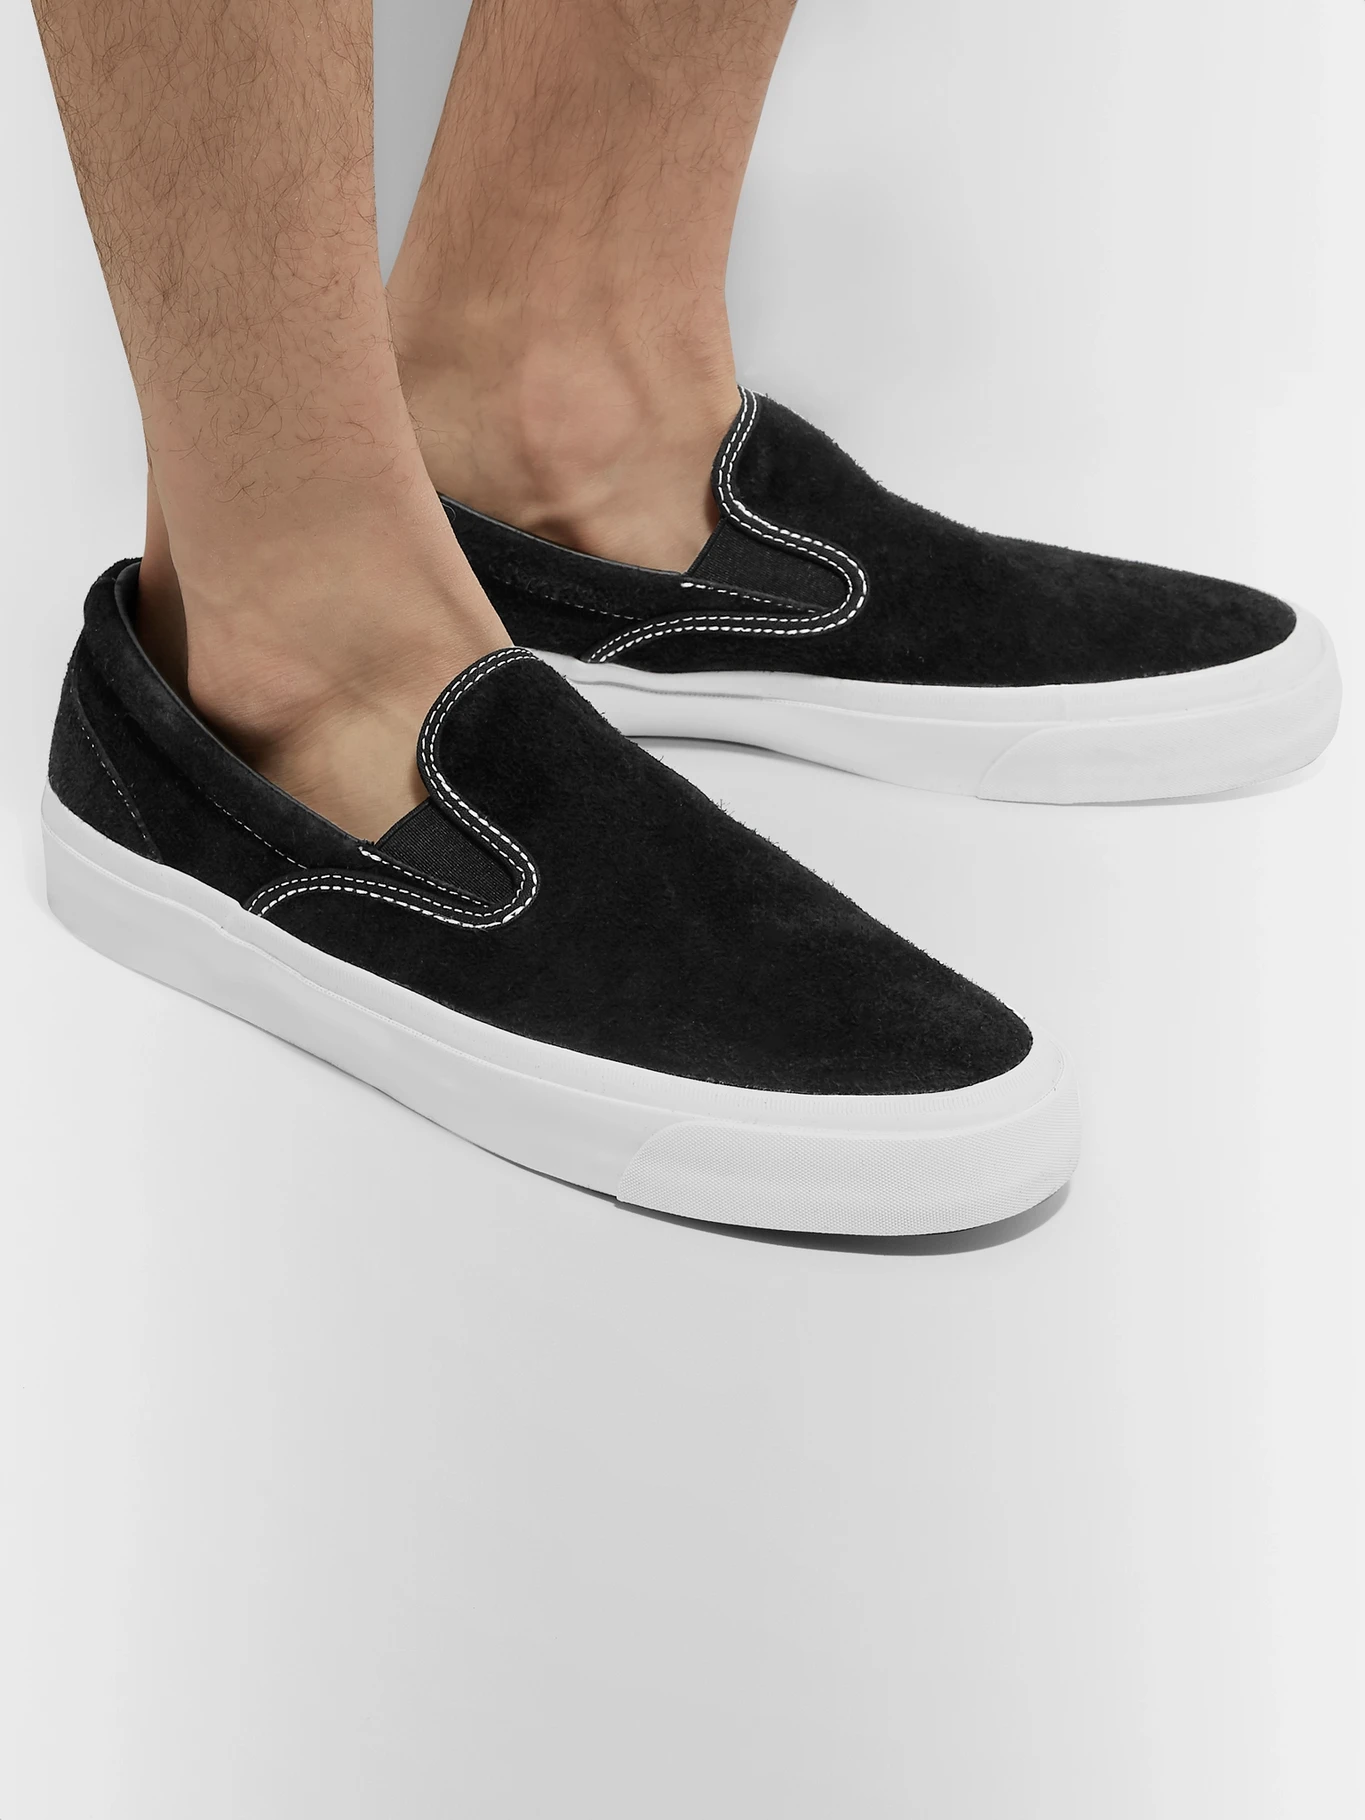 converse one star cc slip on review